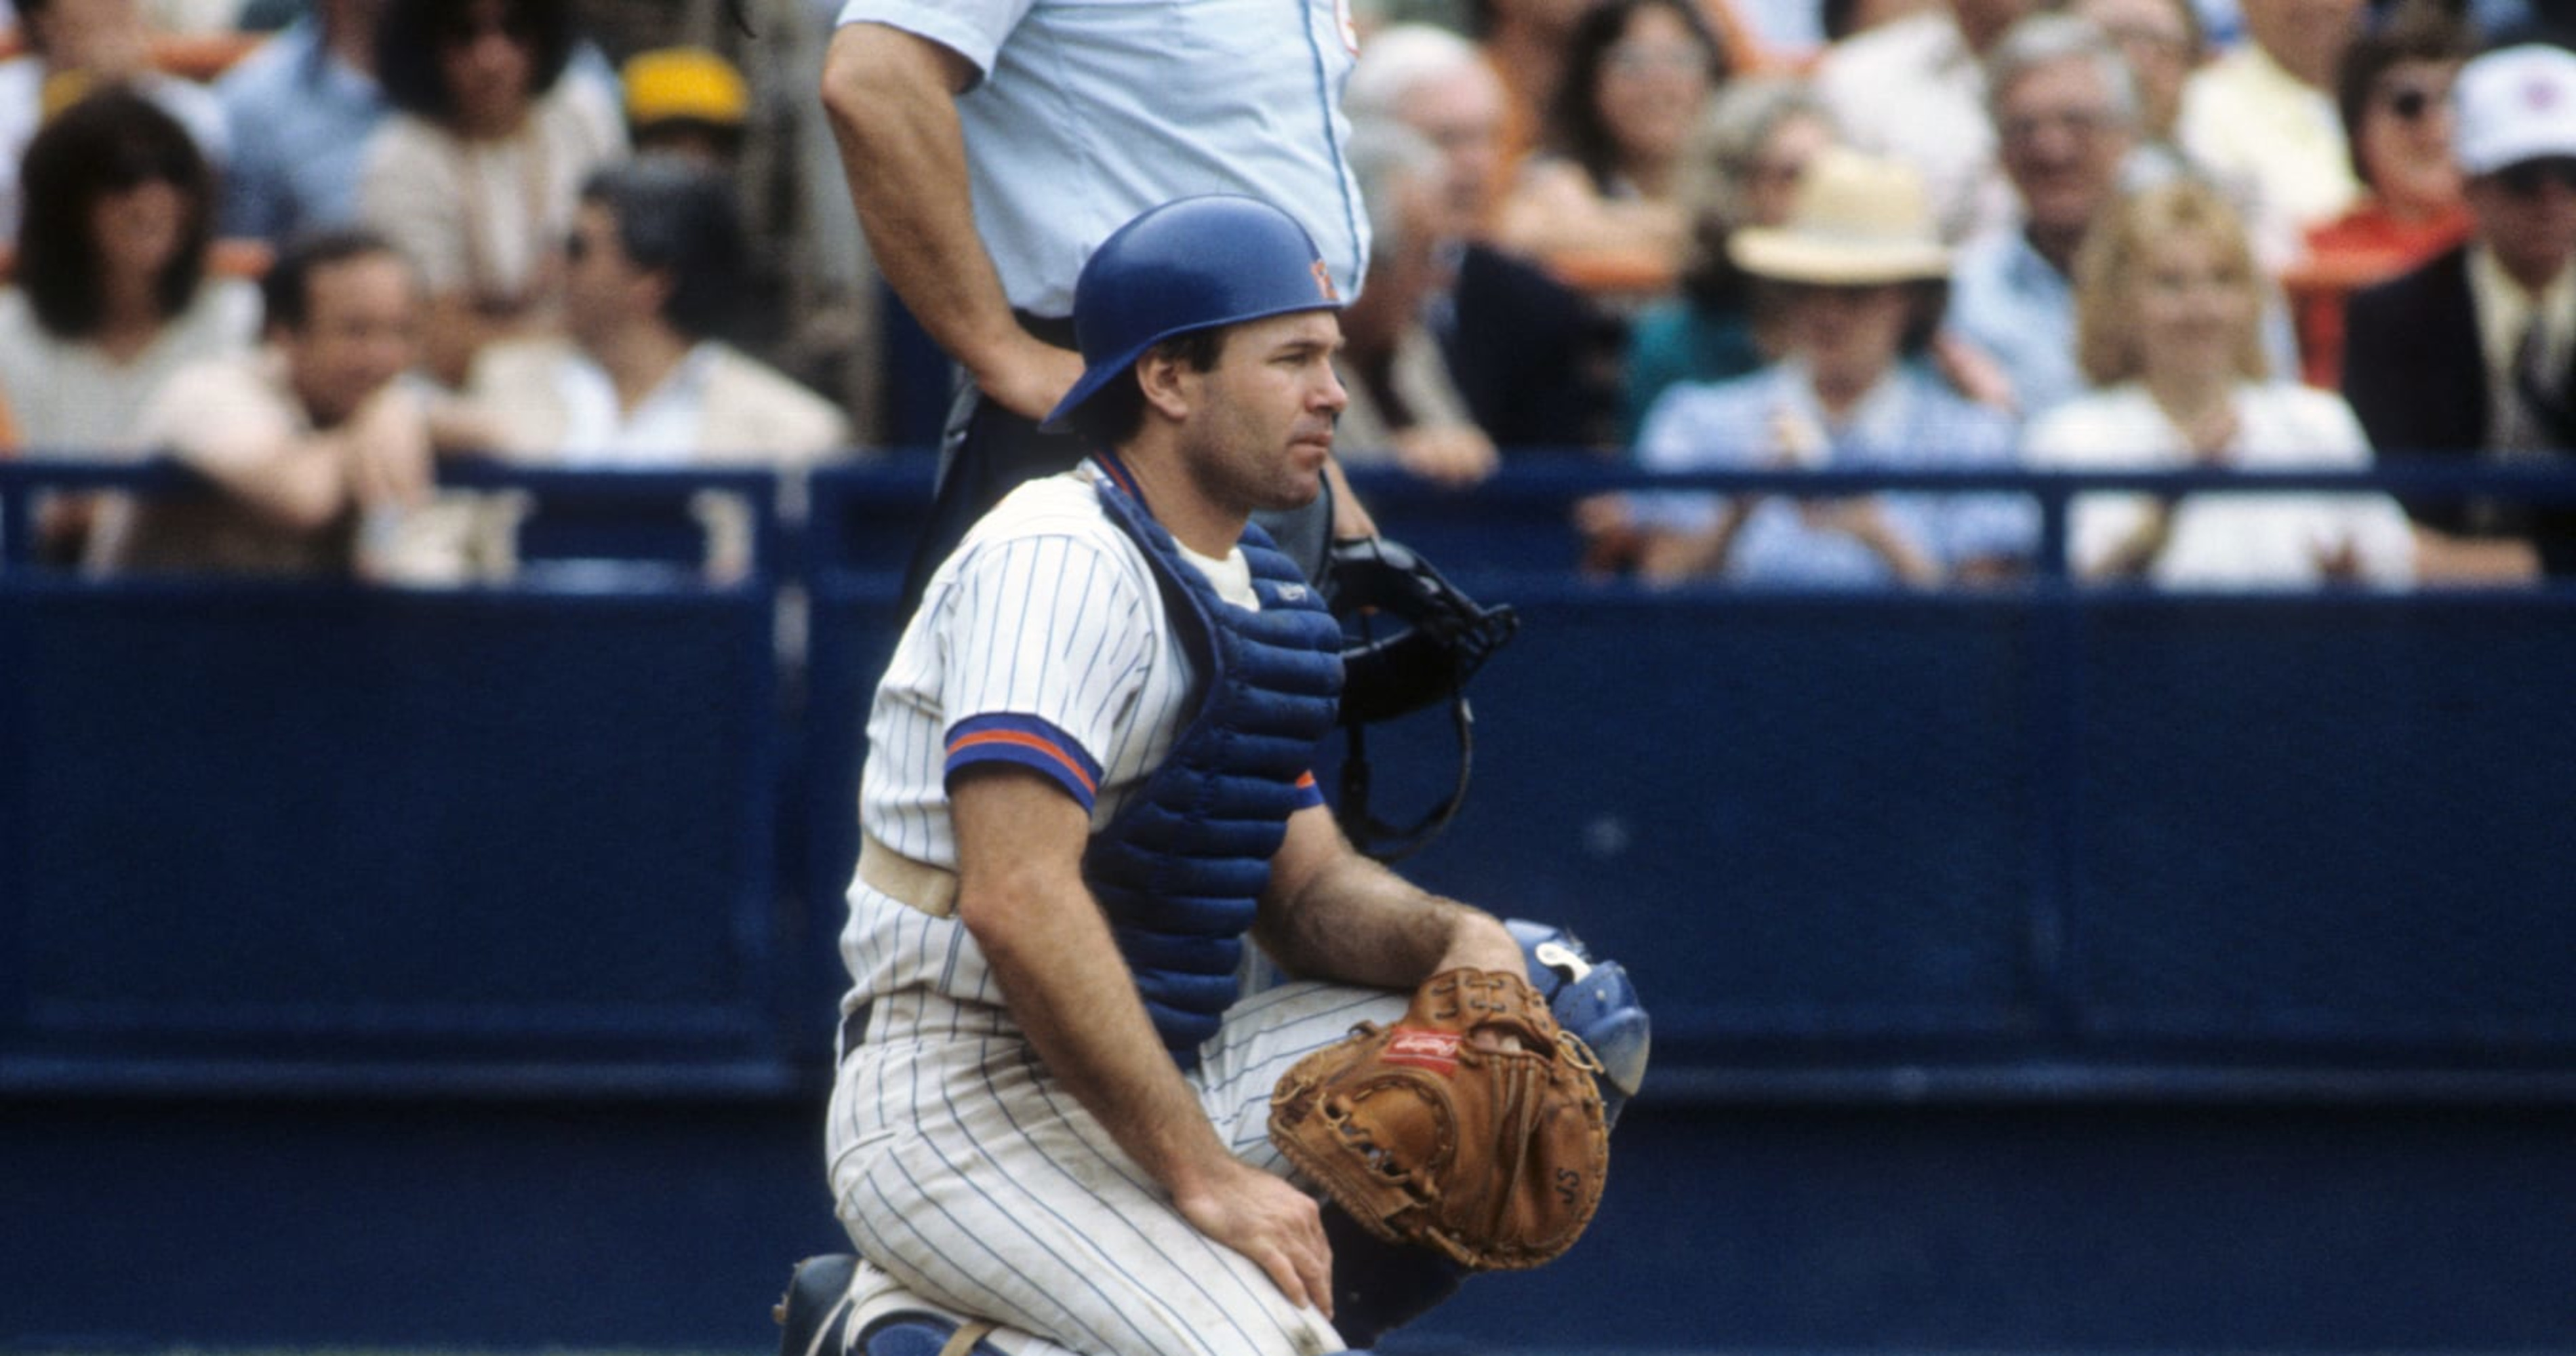 Former Mets All-Star Catcher John Stearns Dies at Age 71